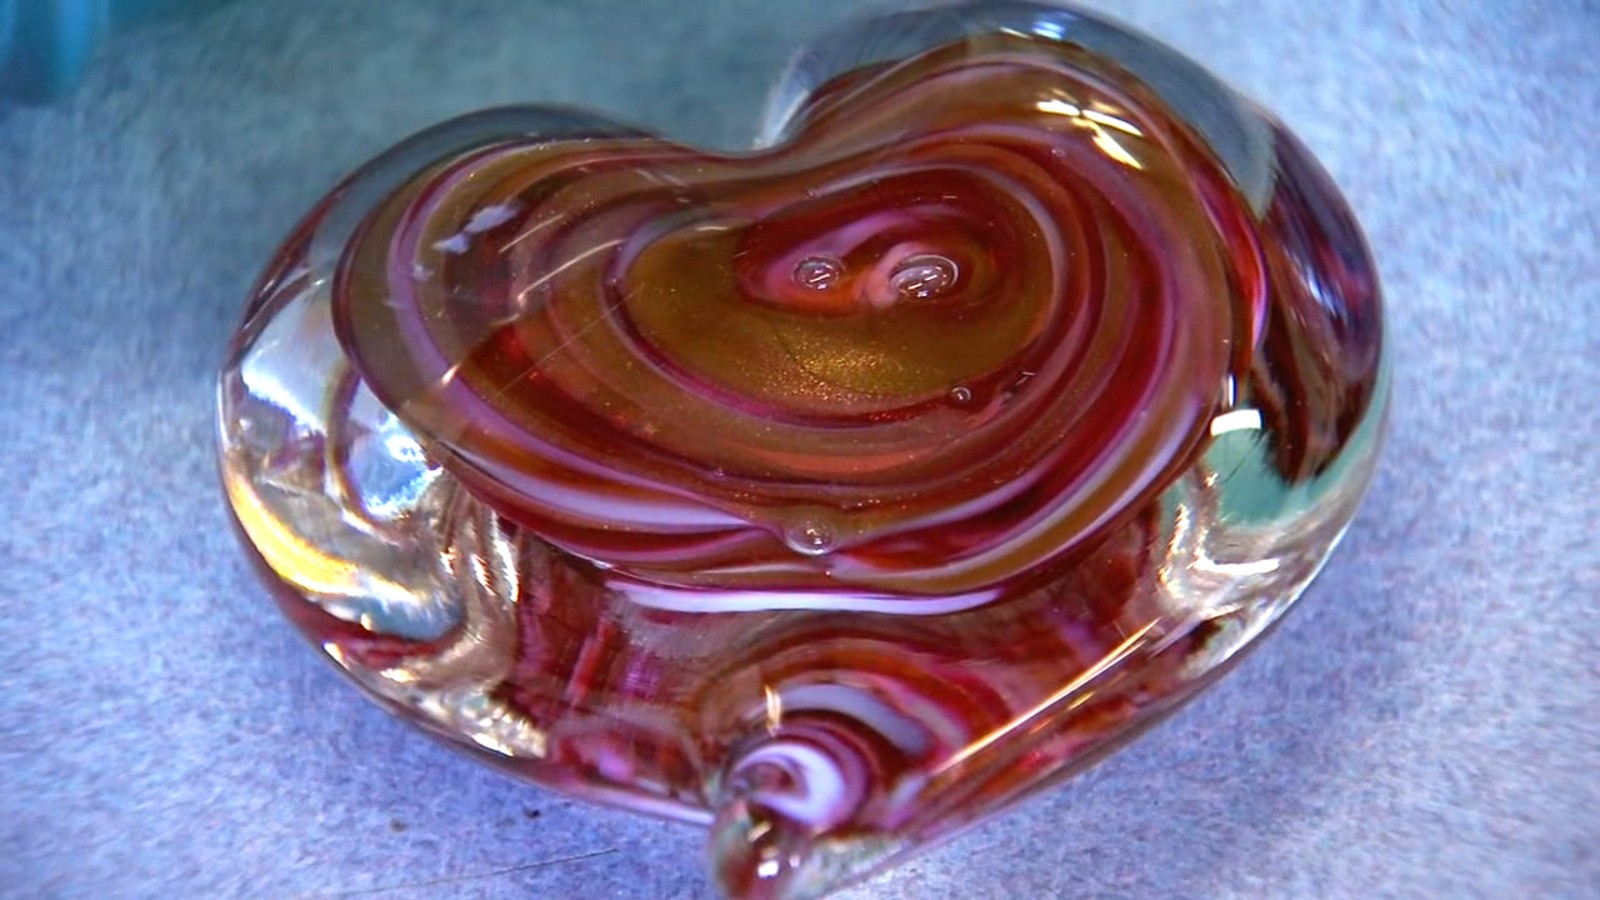 You can make your own beautiful glass art at this California studio